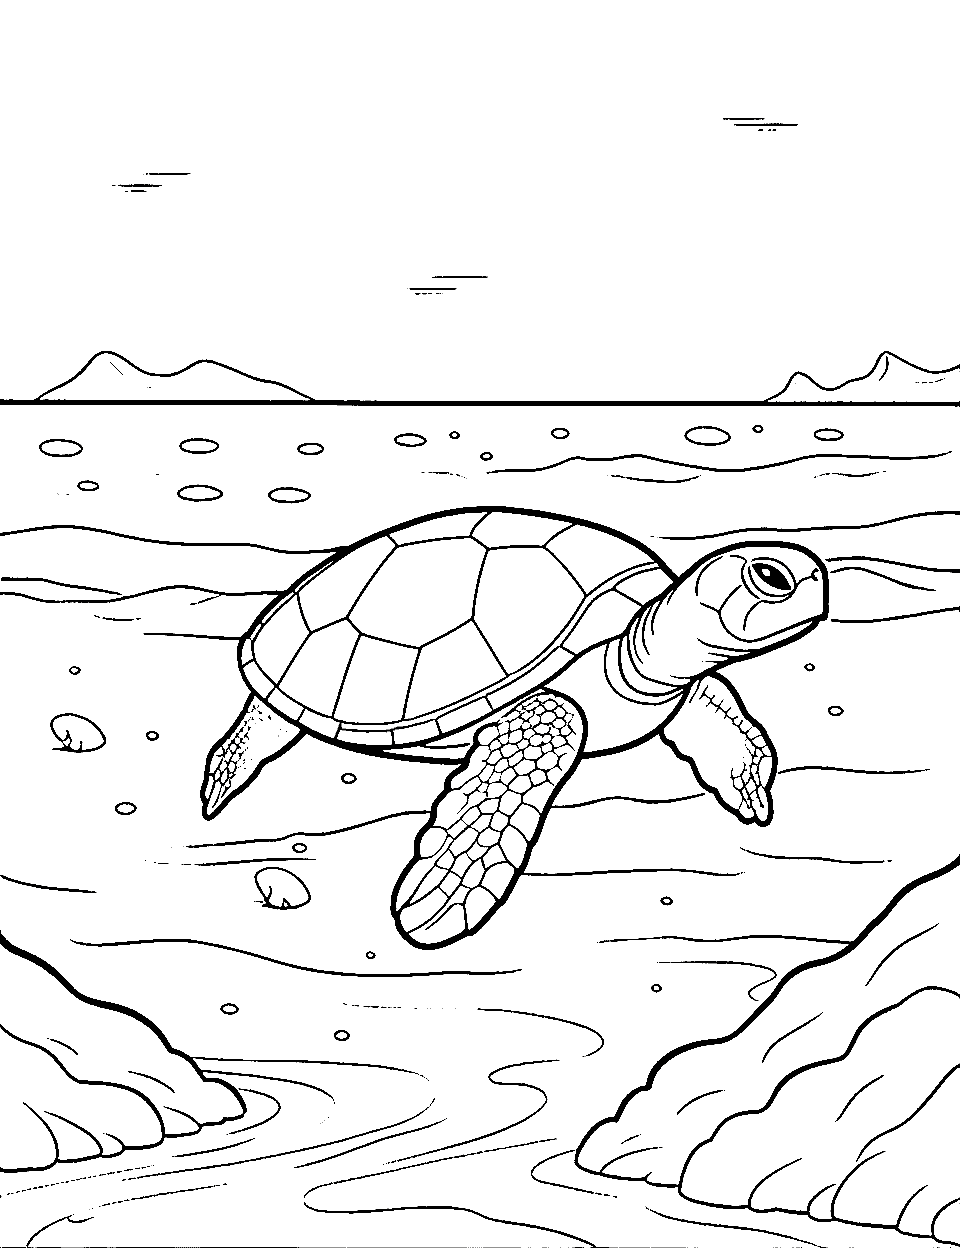 Turtle on the Shore Coloring Page - A turtle returning to the shore after a swim in a lake.